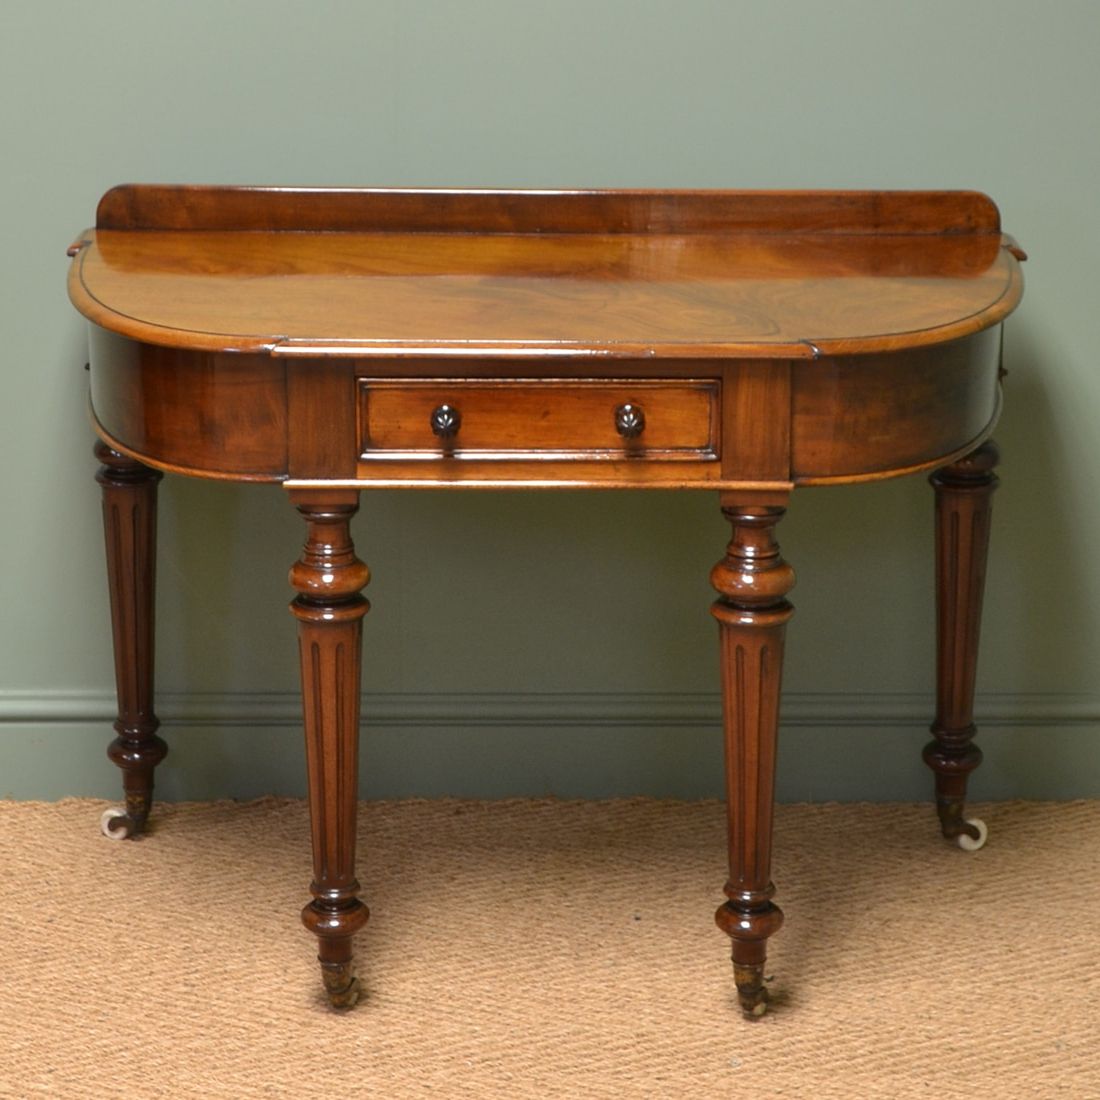 Superb Quality Figured Mahogany Antique Victorian Side Intended For 2019 Vintage Coal Console Tables (View 7 of 10)